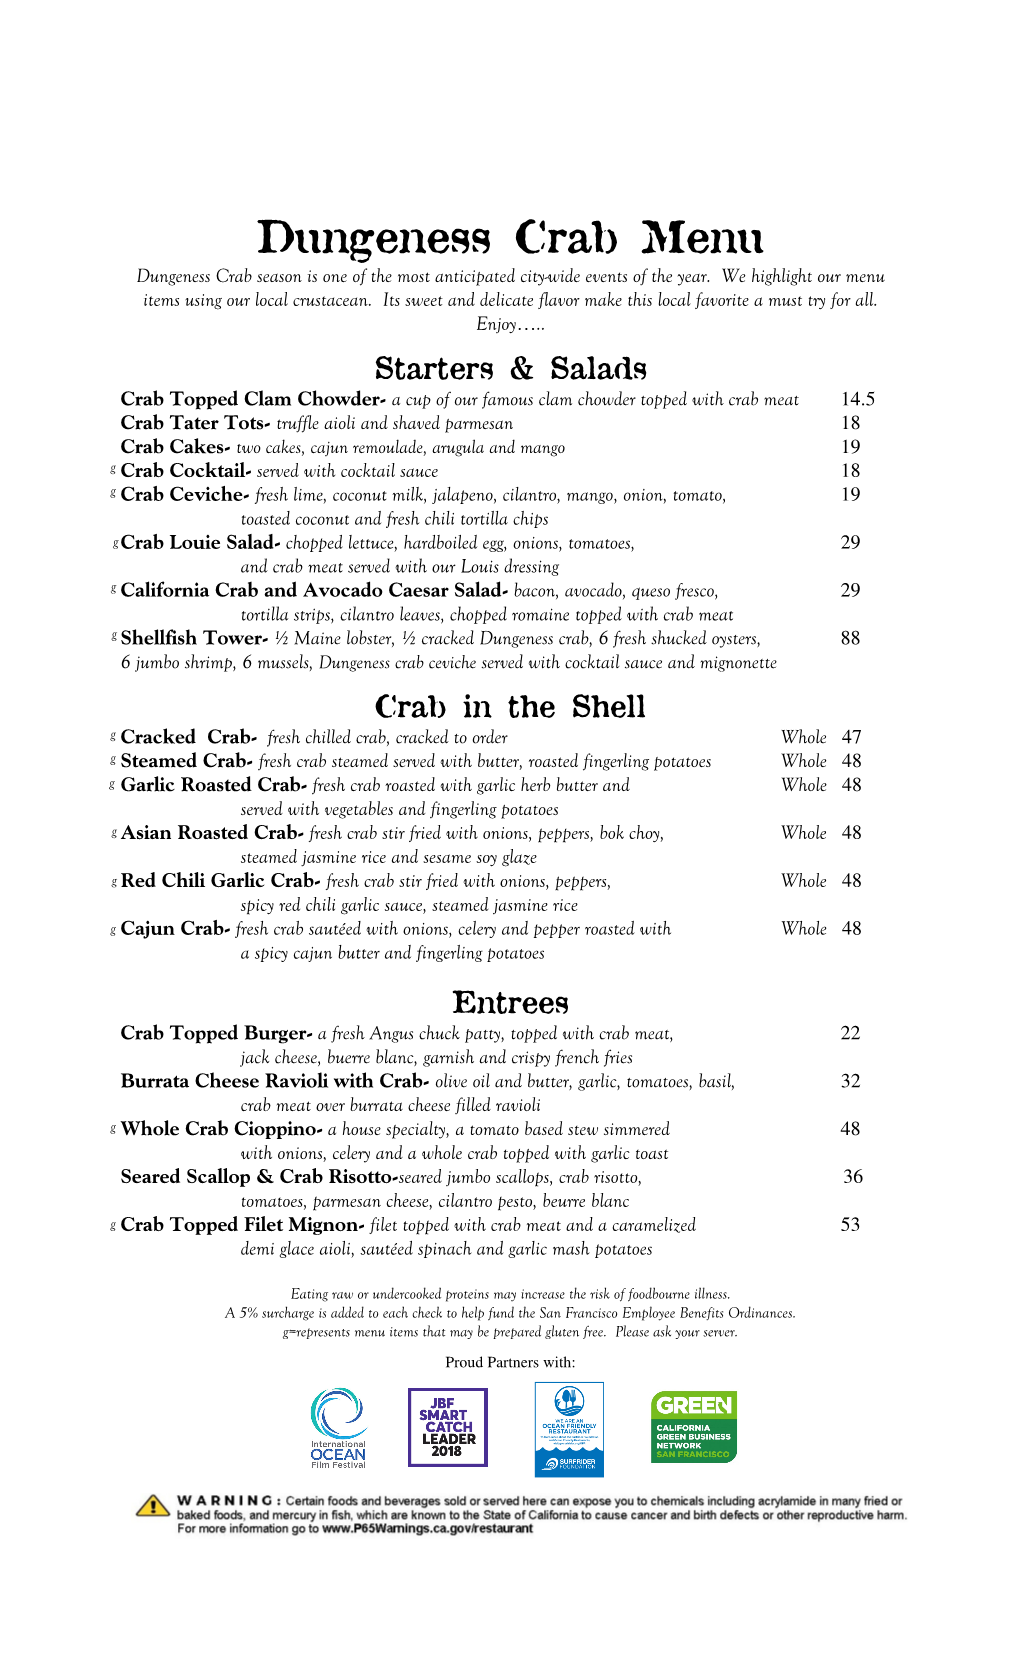 Dungeness Crab Menu Dungeness Crab Season Is One of the Most Anticipated City-Wide Events of the Year